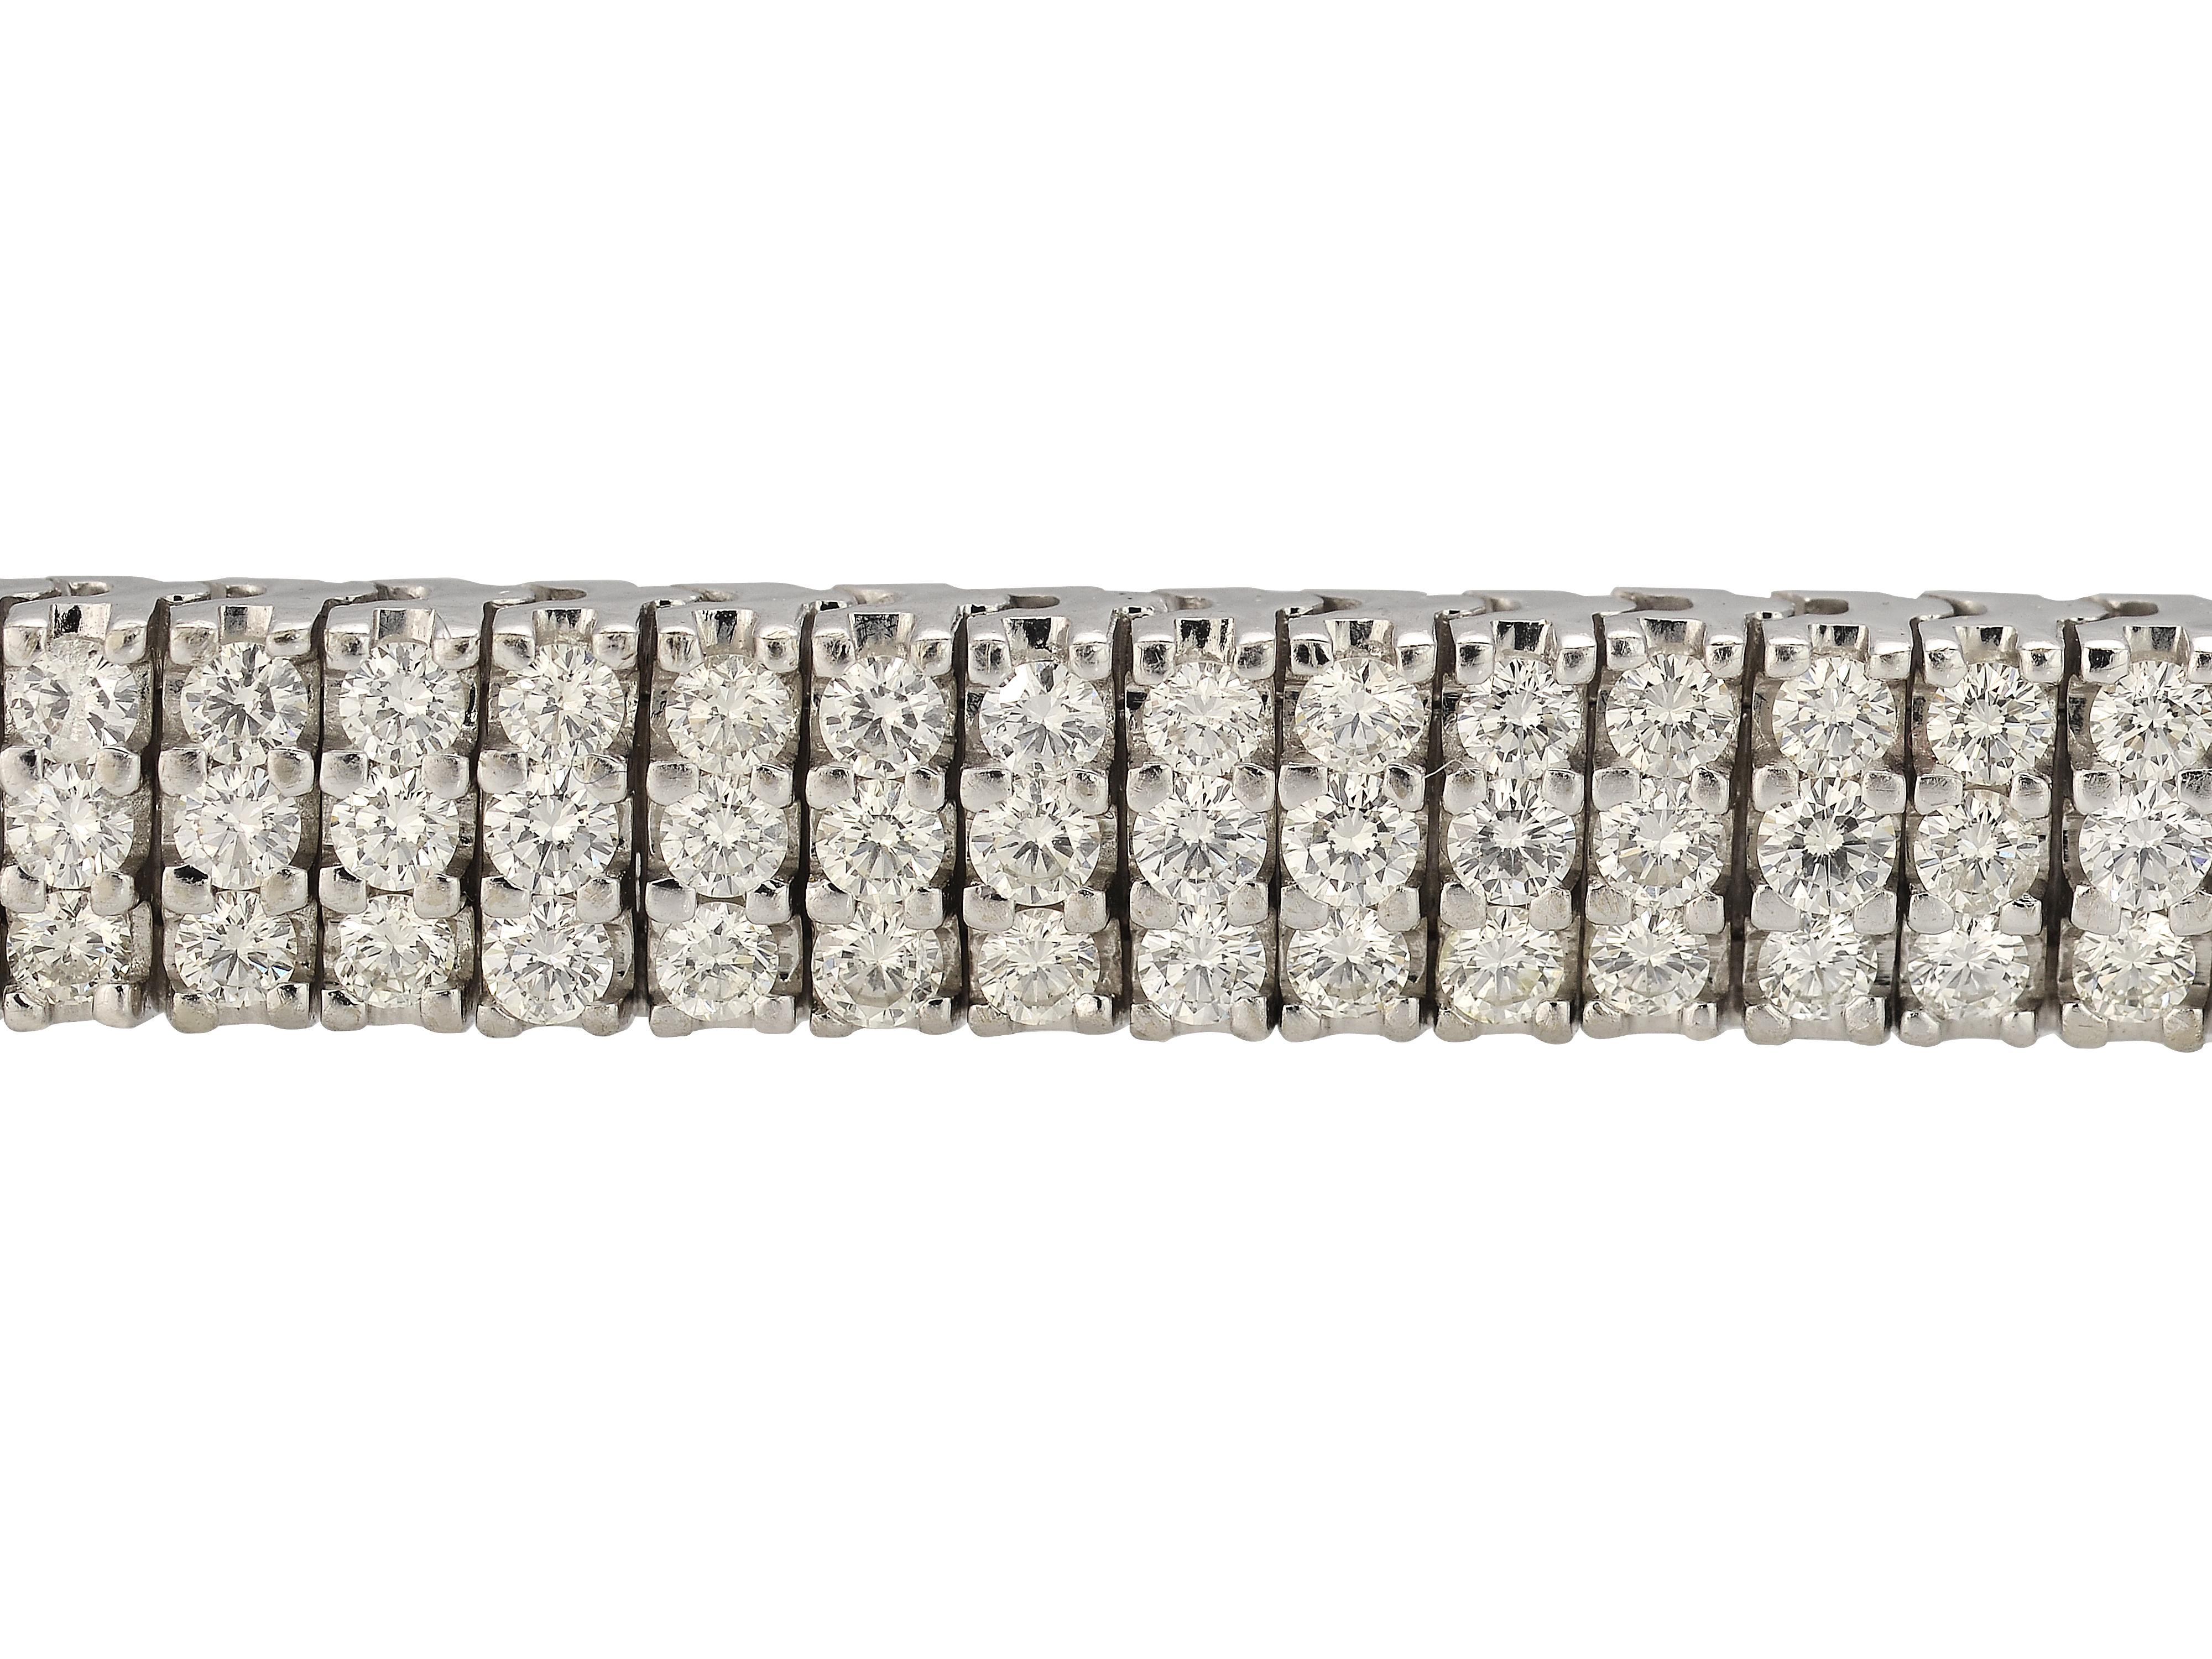 14 Karat White Gold Articulated Three Row Bracelet Featuring 225 Prong Set Round Brilliant Cut Diamonds Totaling Approximately 9 Carats Of VS Clarity & J Color. Hidden Safety Under Clasp For Extra Security.